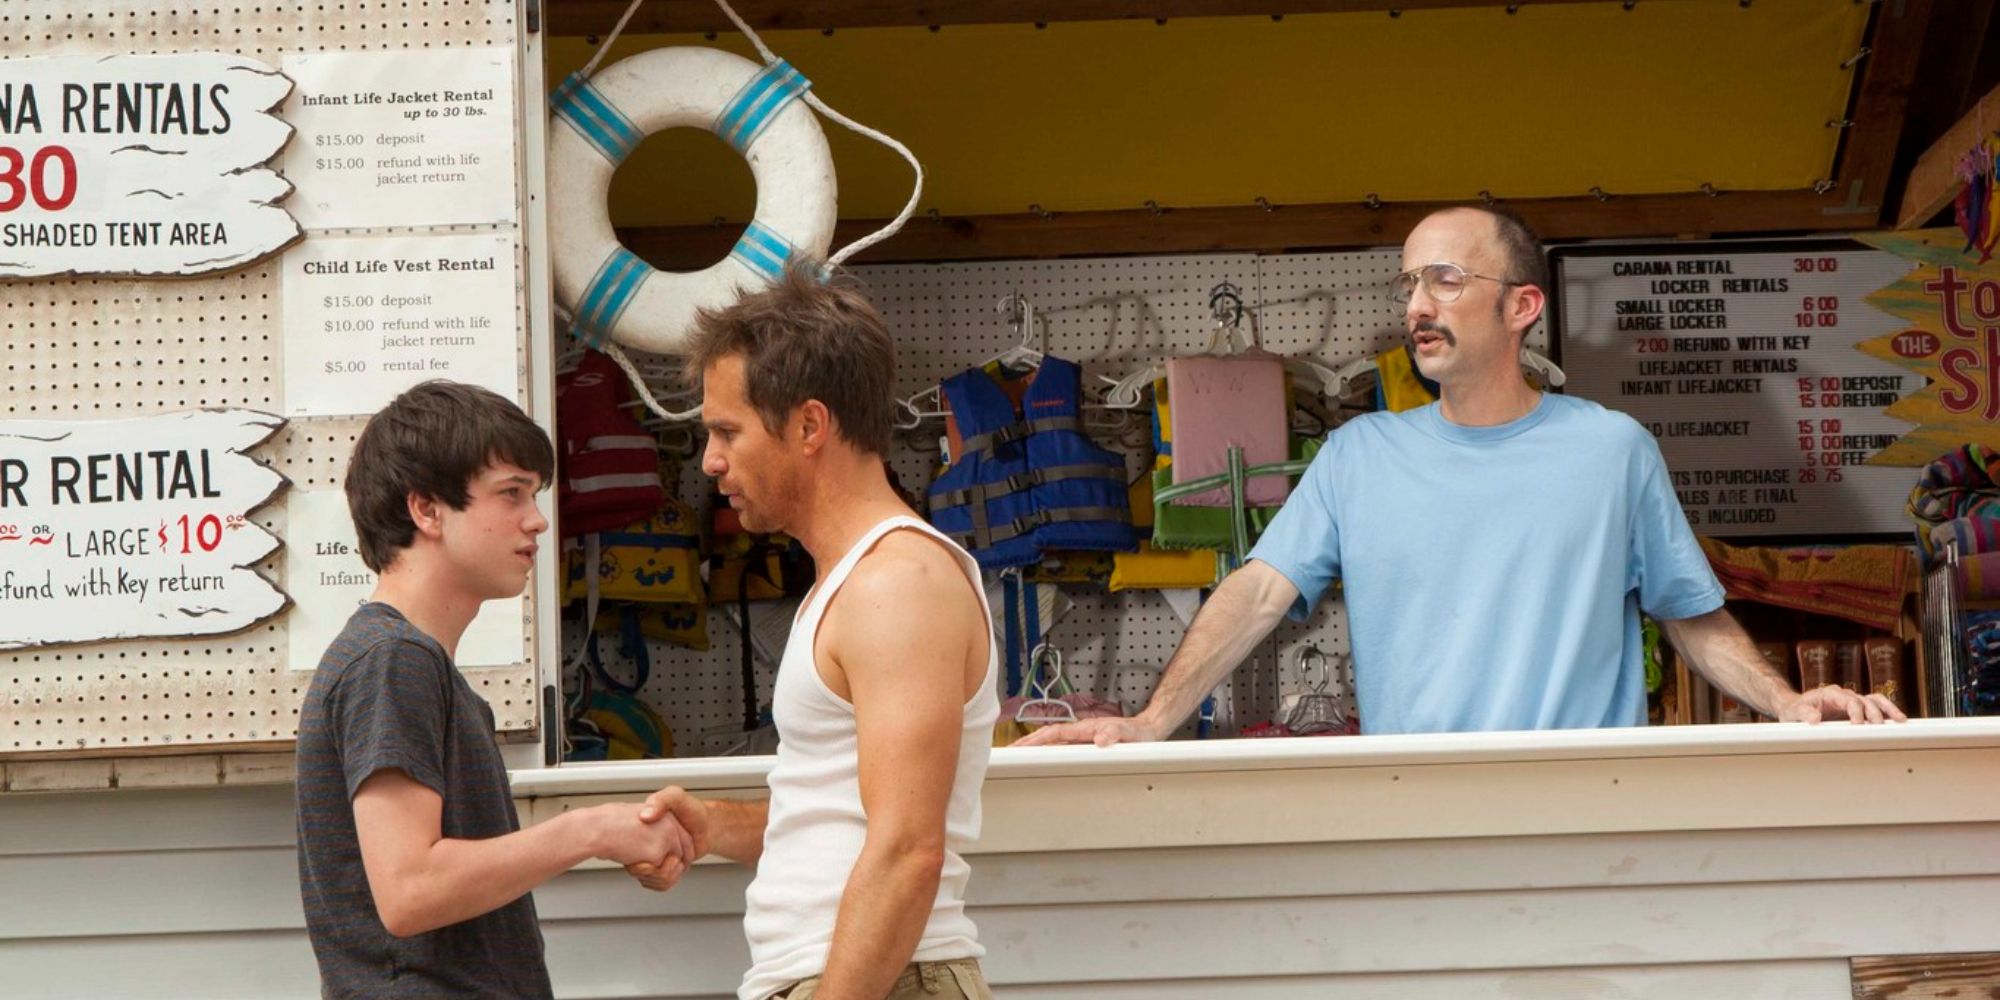 Jim Rash at a rental stand in The Way Way Back